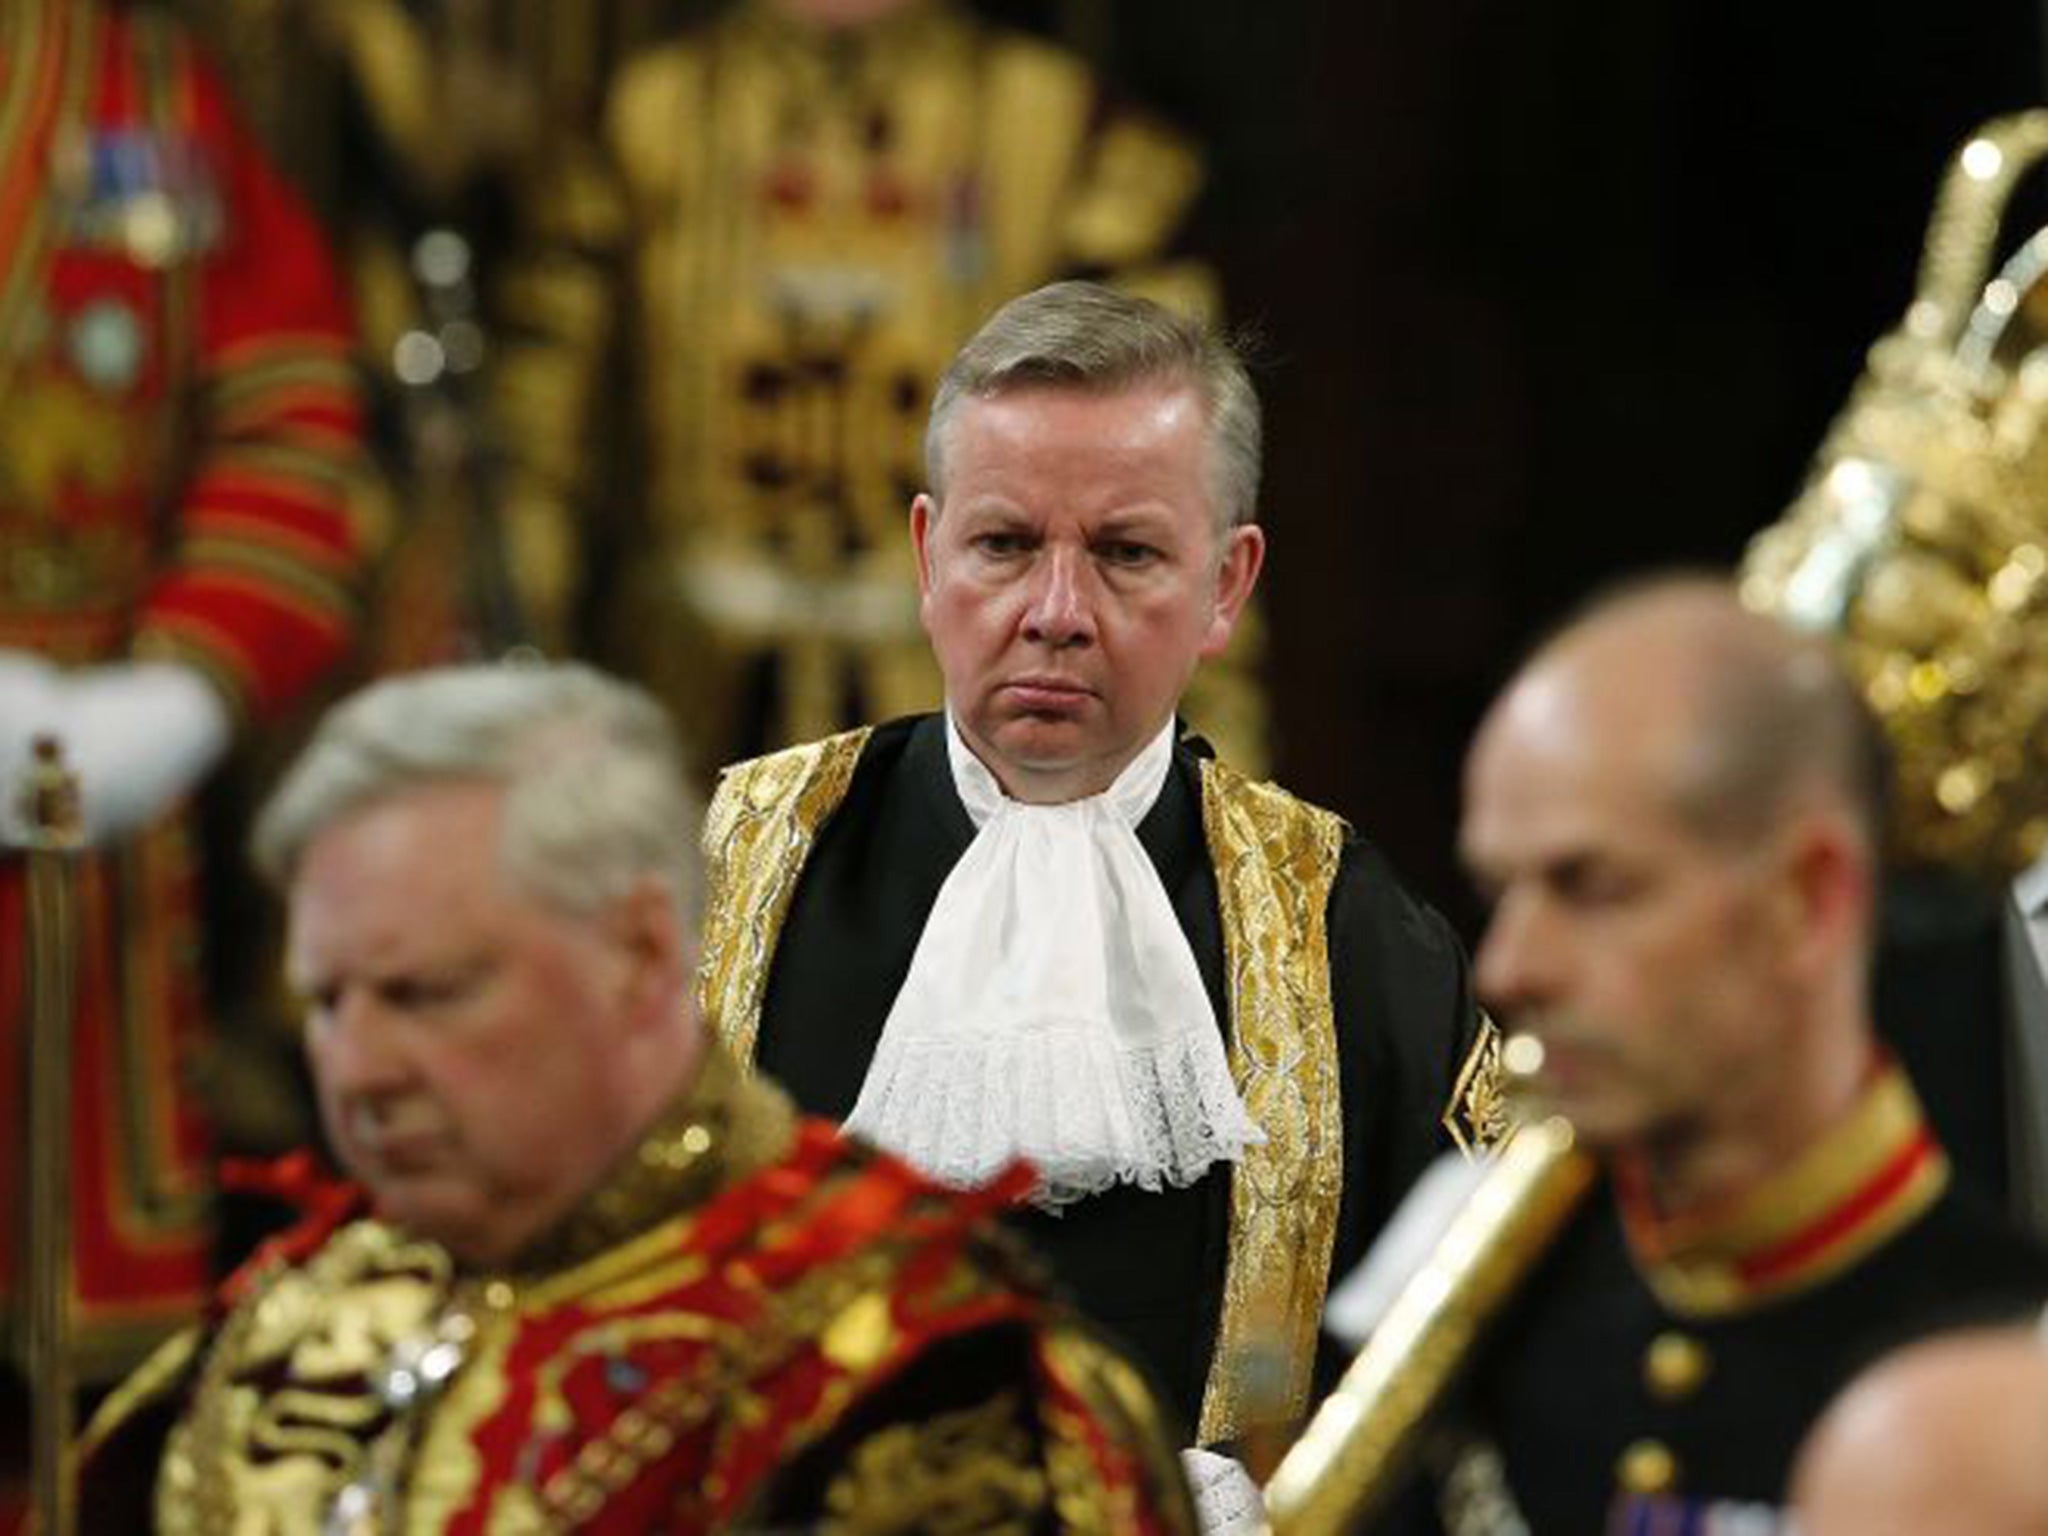 Justice Secretary Michael Gove attends the State Opening of Parliament in the House of Lords